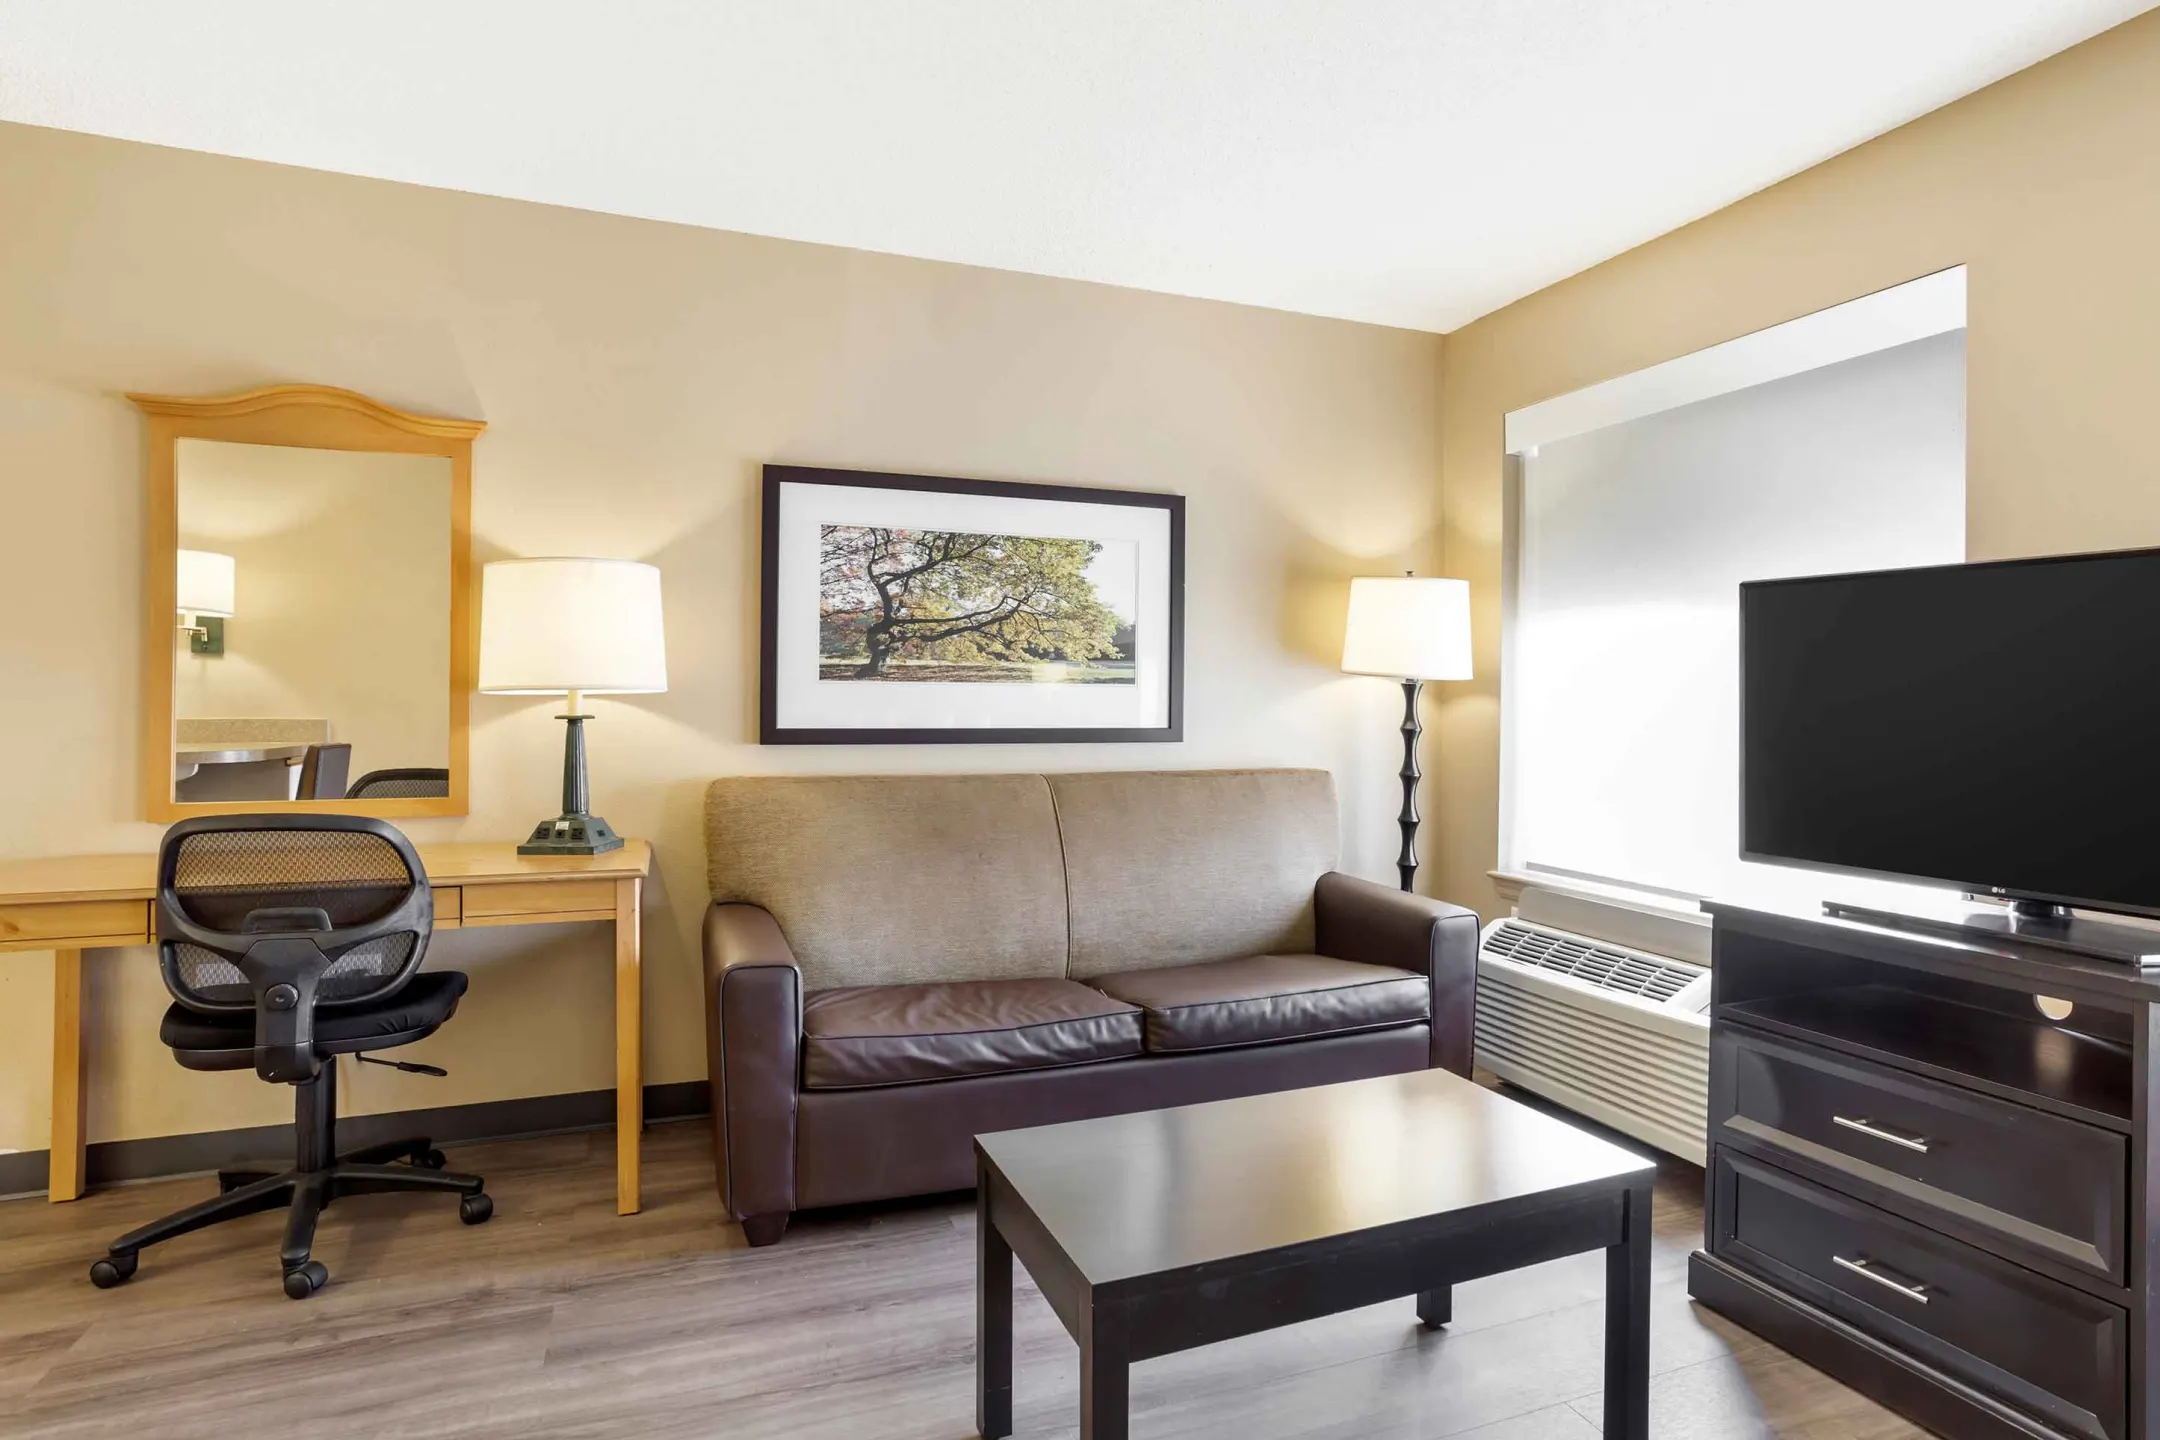 Living Room - Furnished Studio - Meadowlands - East Rutherford - East Rutherford, NJ